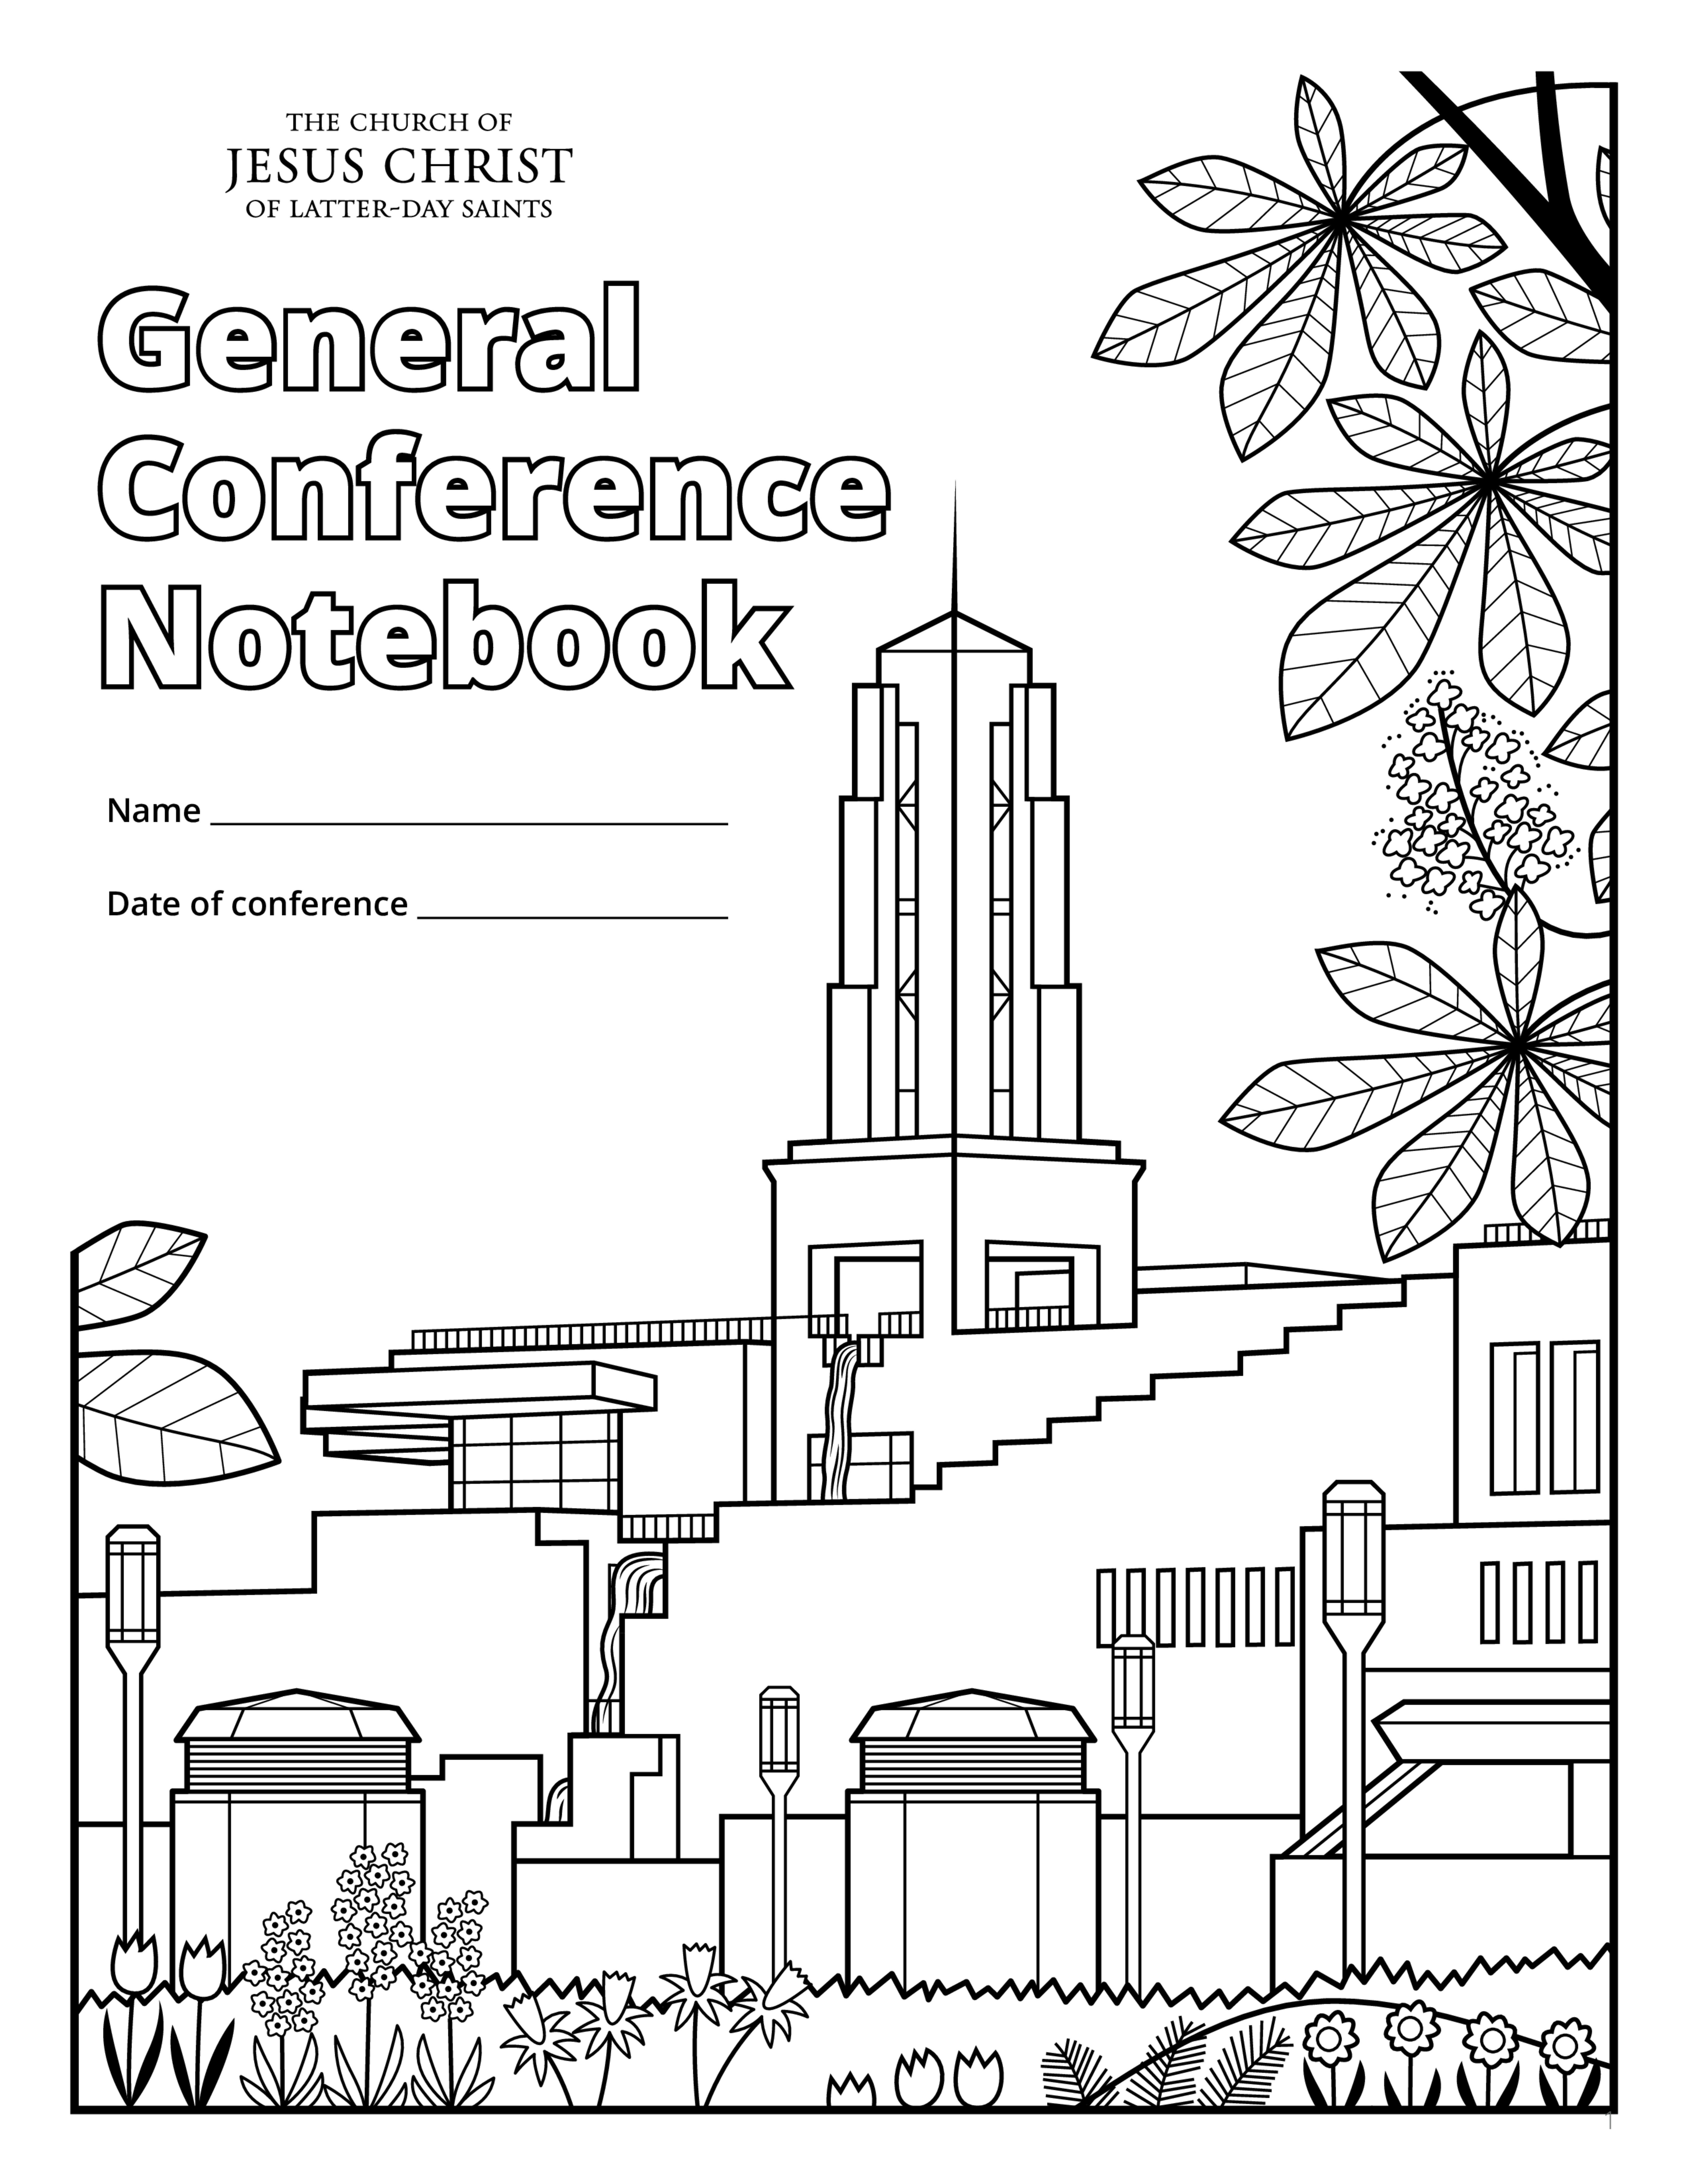 The cover page of the General Conference Notebook.